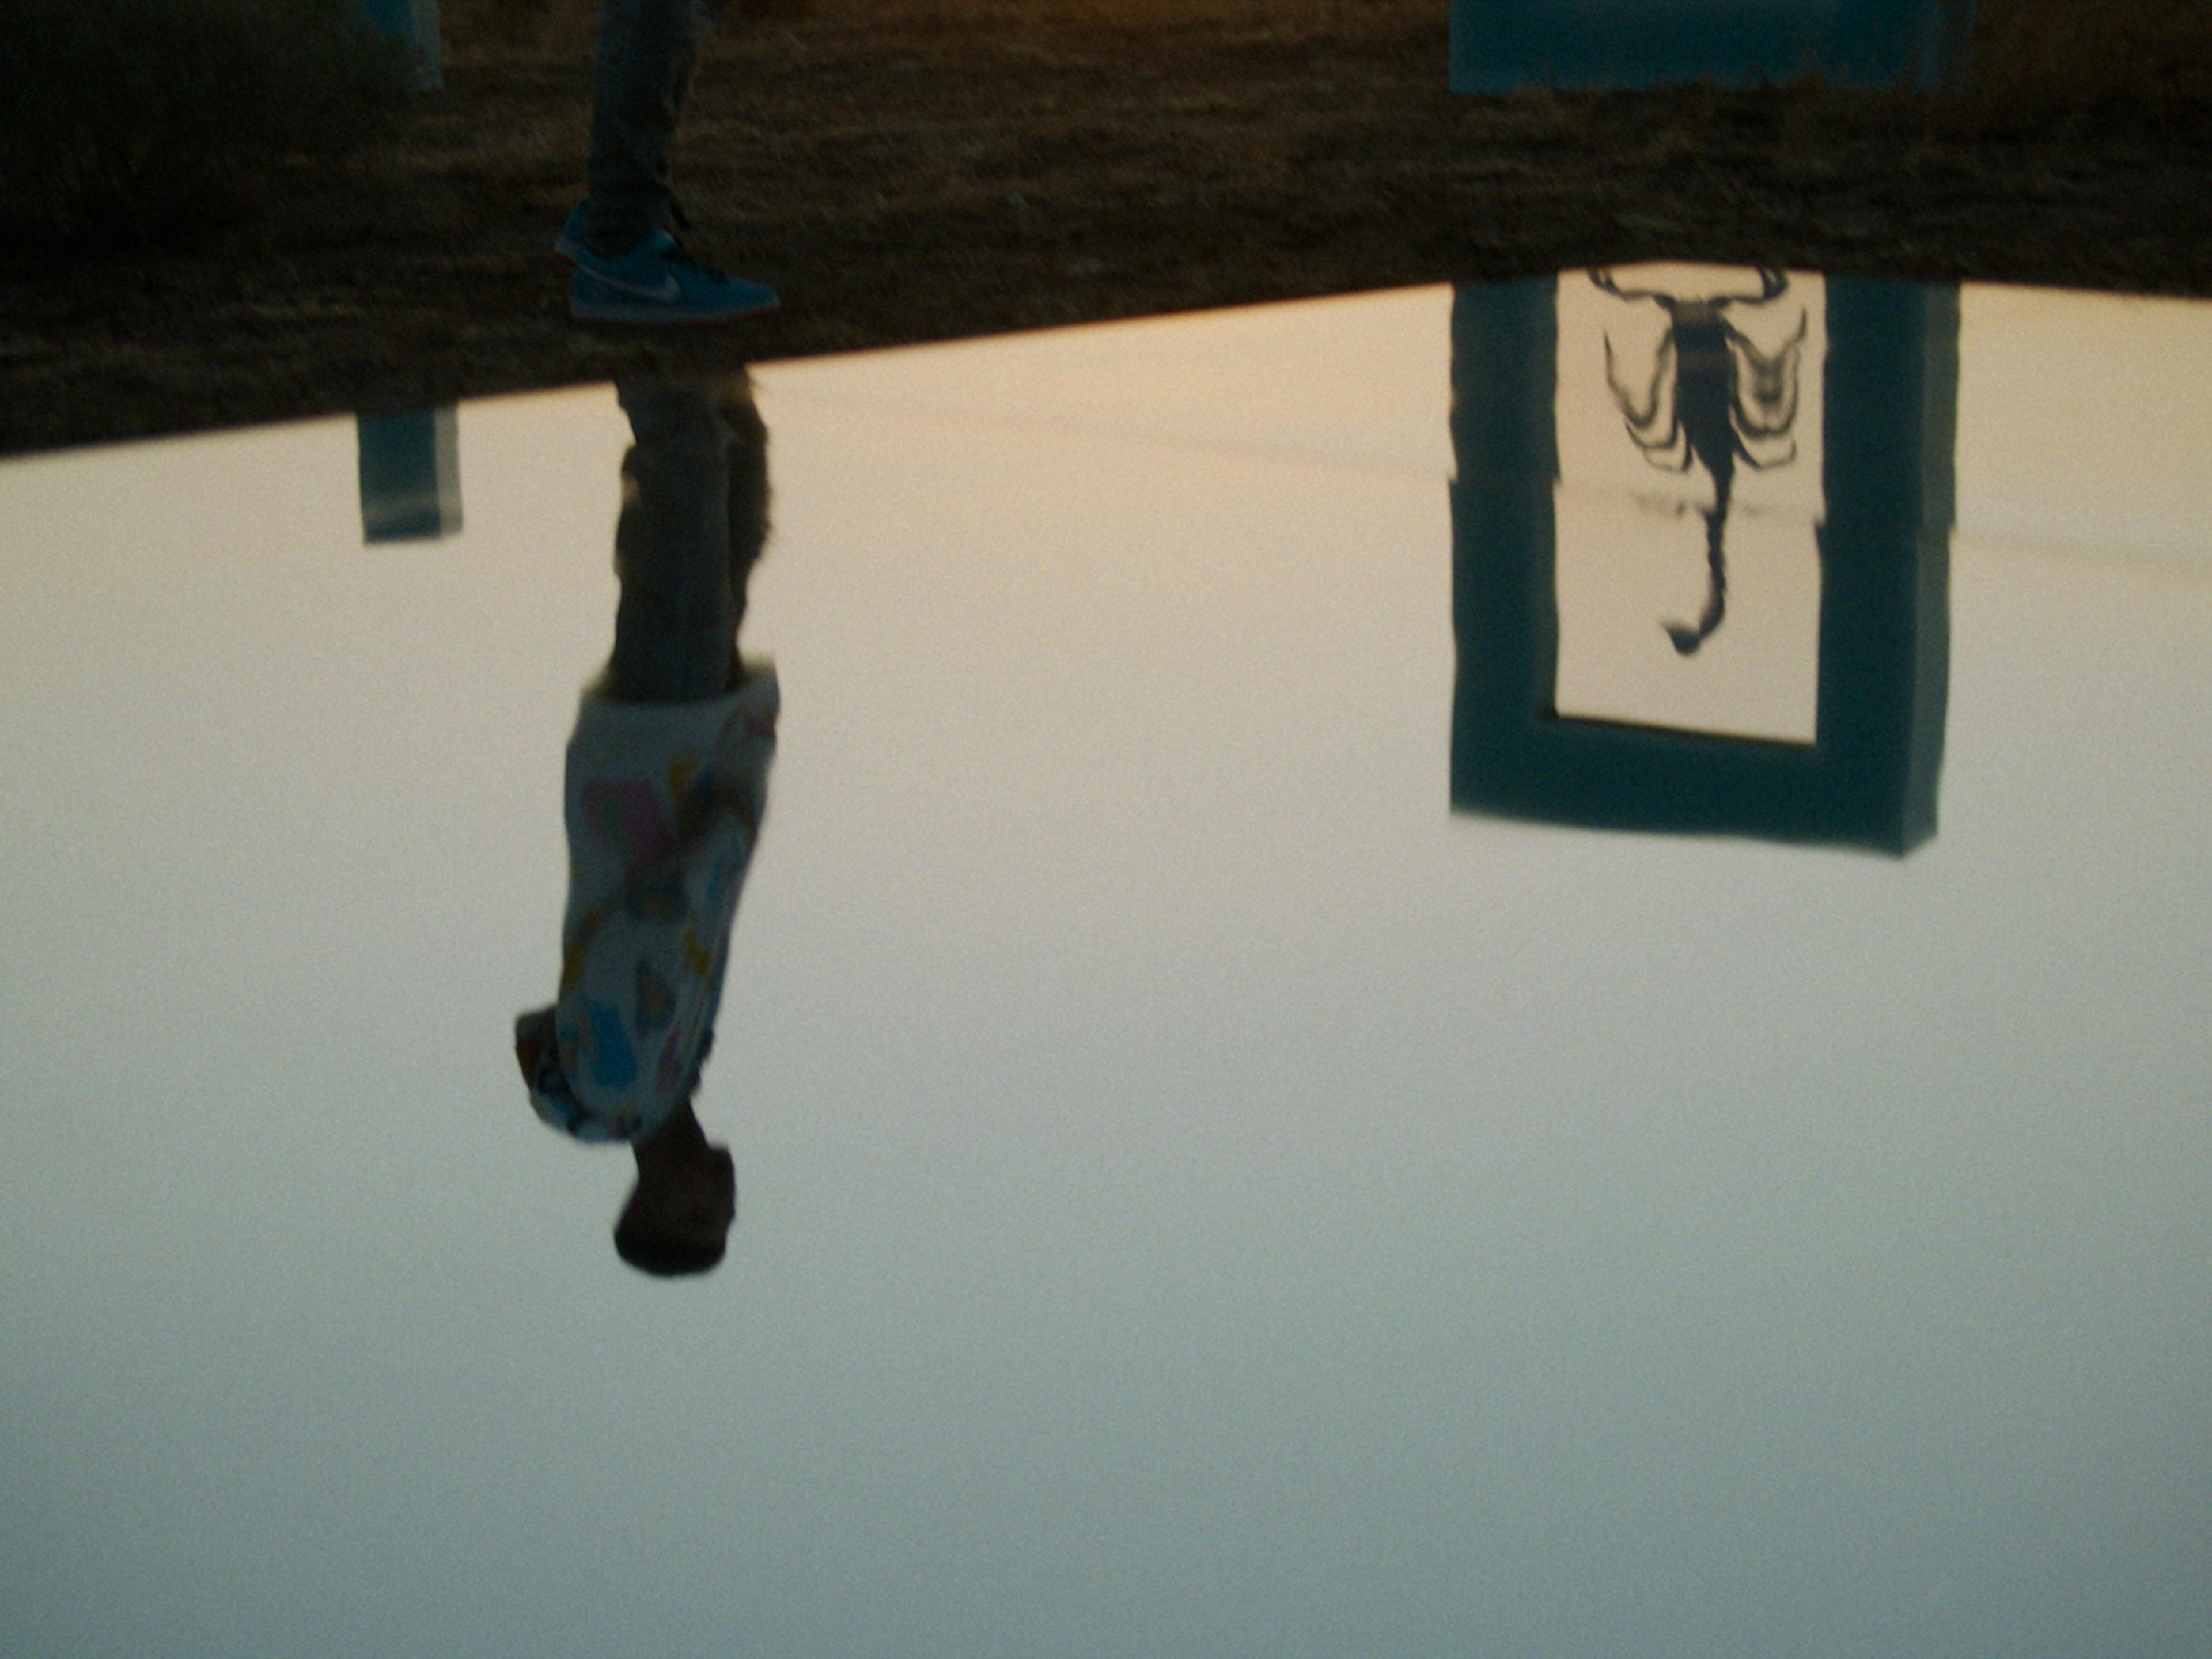 An upside-down reflection of a person next to a large framed rectangular structure with a scorpion inside